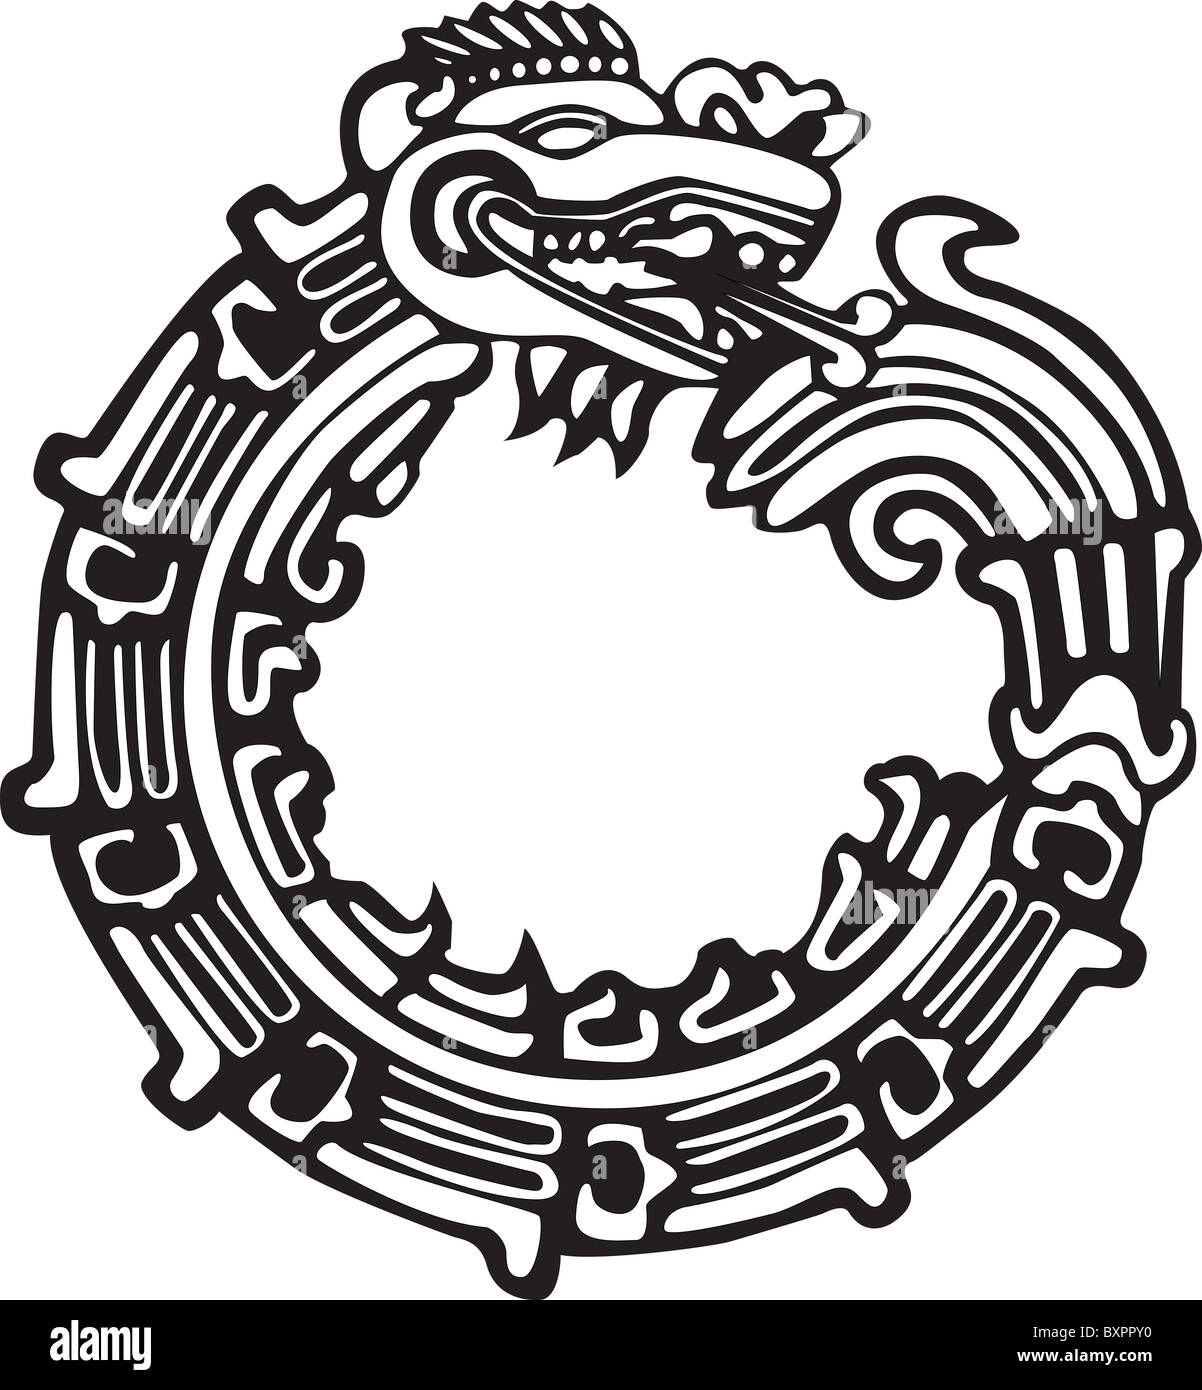 Aztec Maya dragon, vector, great for tattoo. Can be fully personalized and colored. Stock Photo